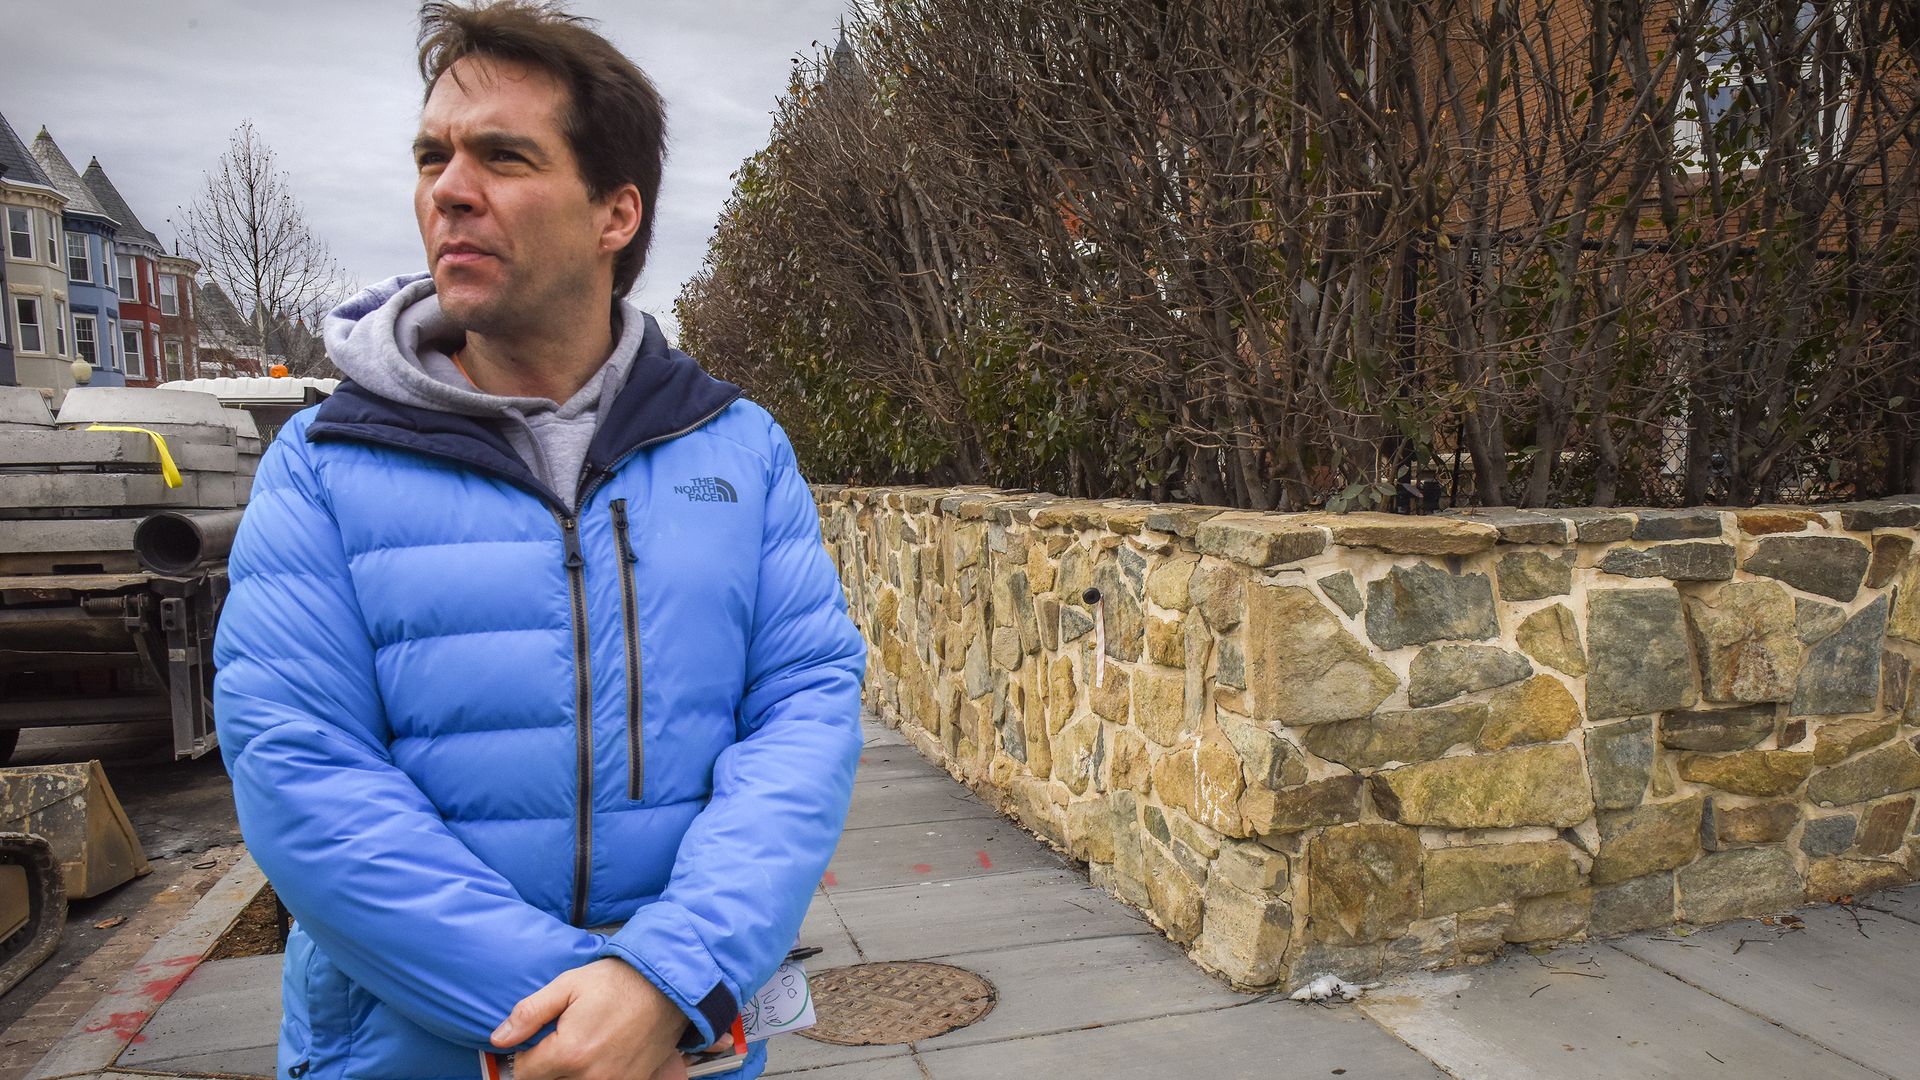  Jack Burkman, the lobbyist who has put a sizable donation to solve the murder of Seth Rich, canvasses the neighborhood of the murder on January, 10, 2017 in Washington, DC. 